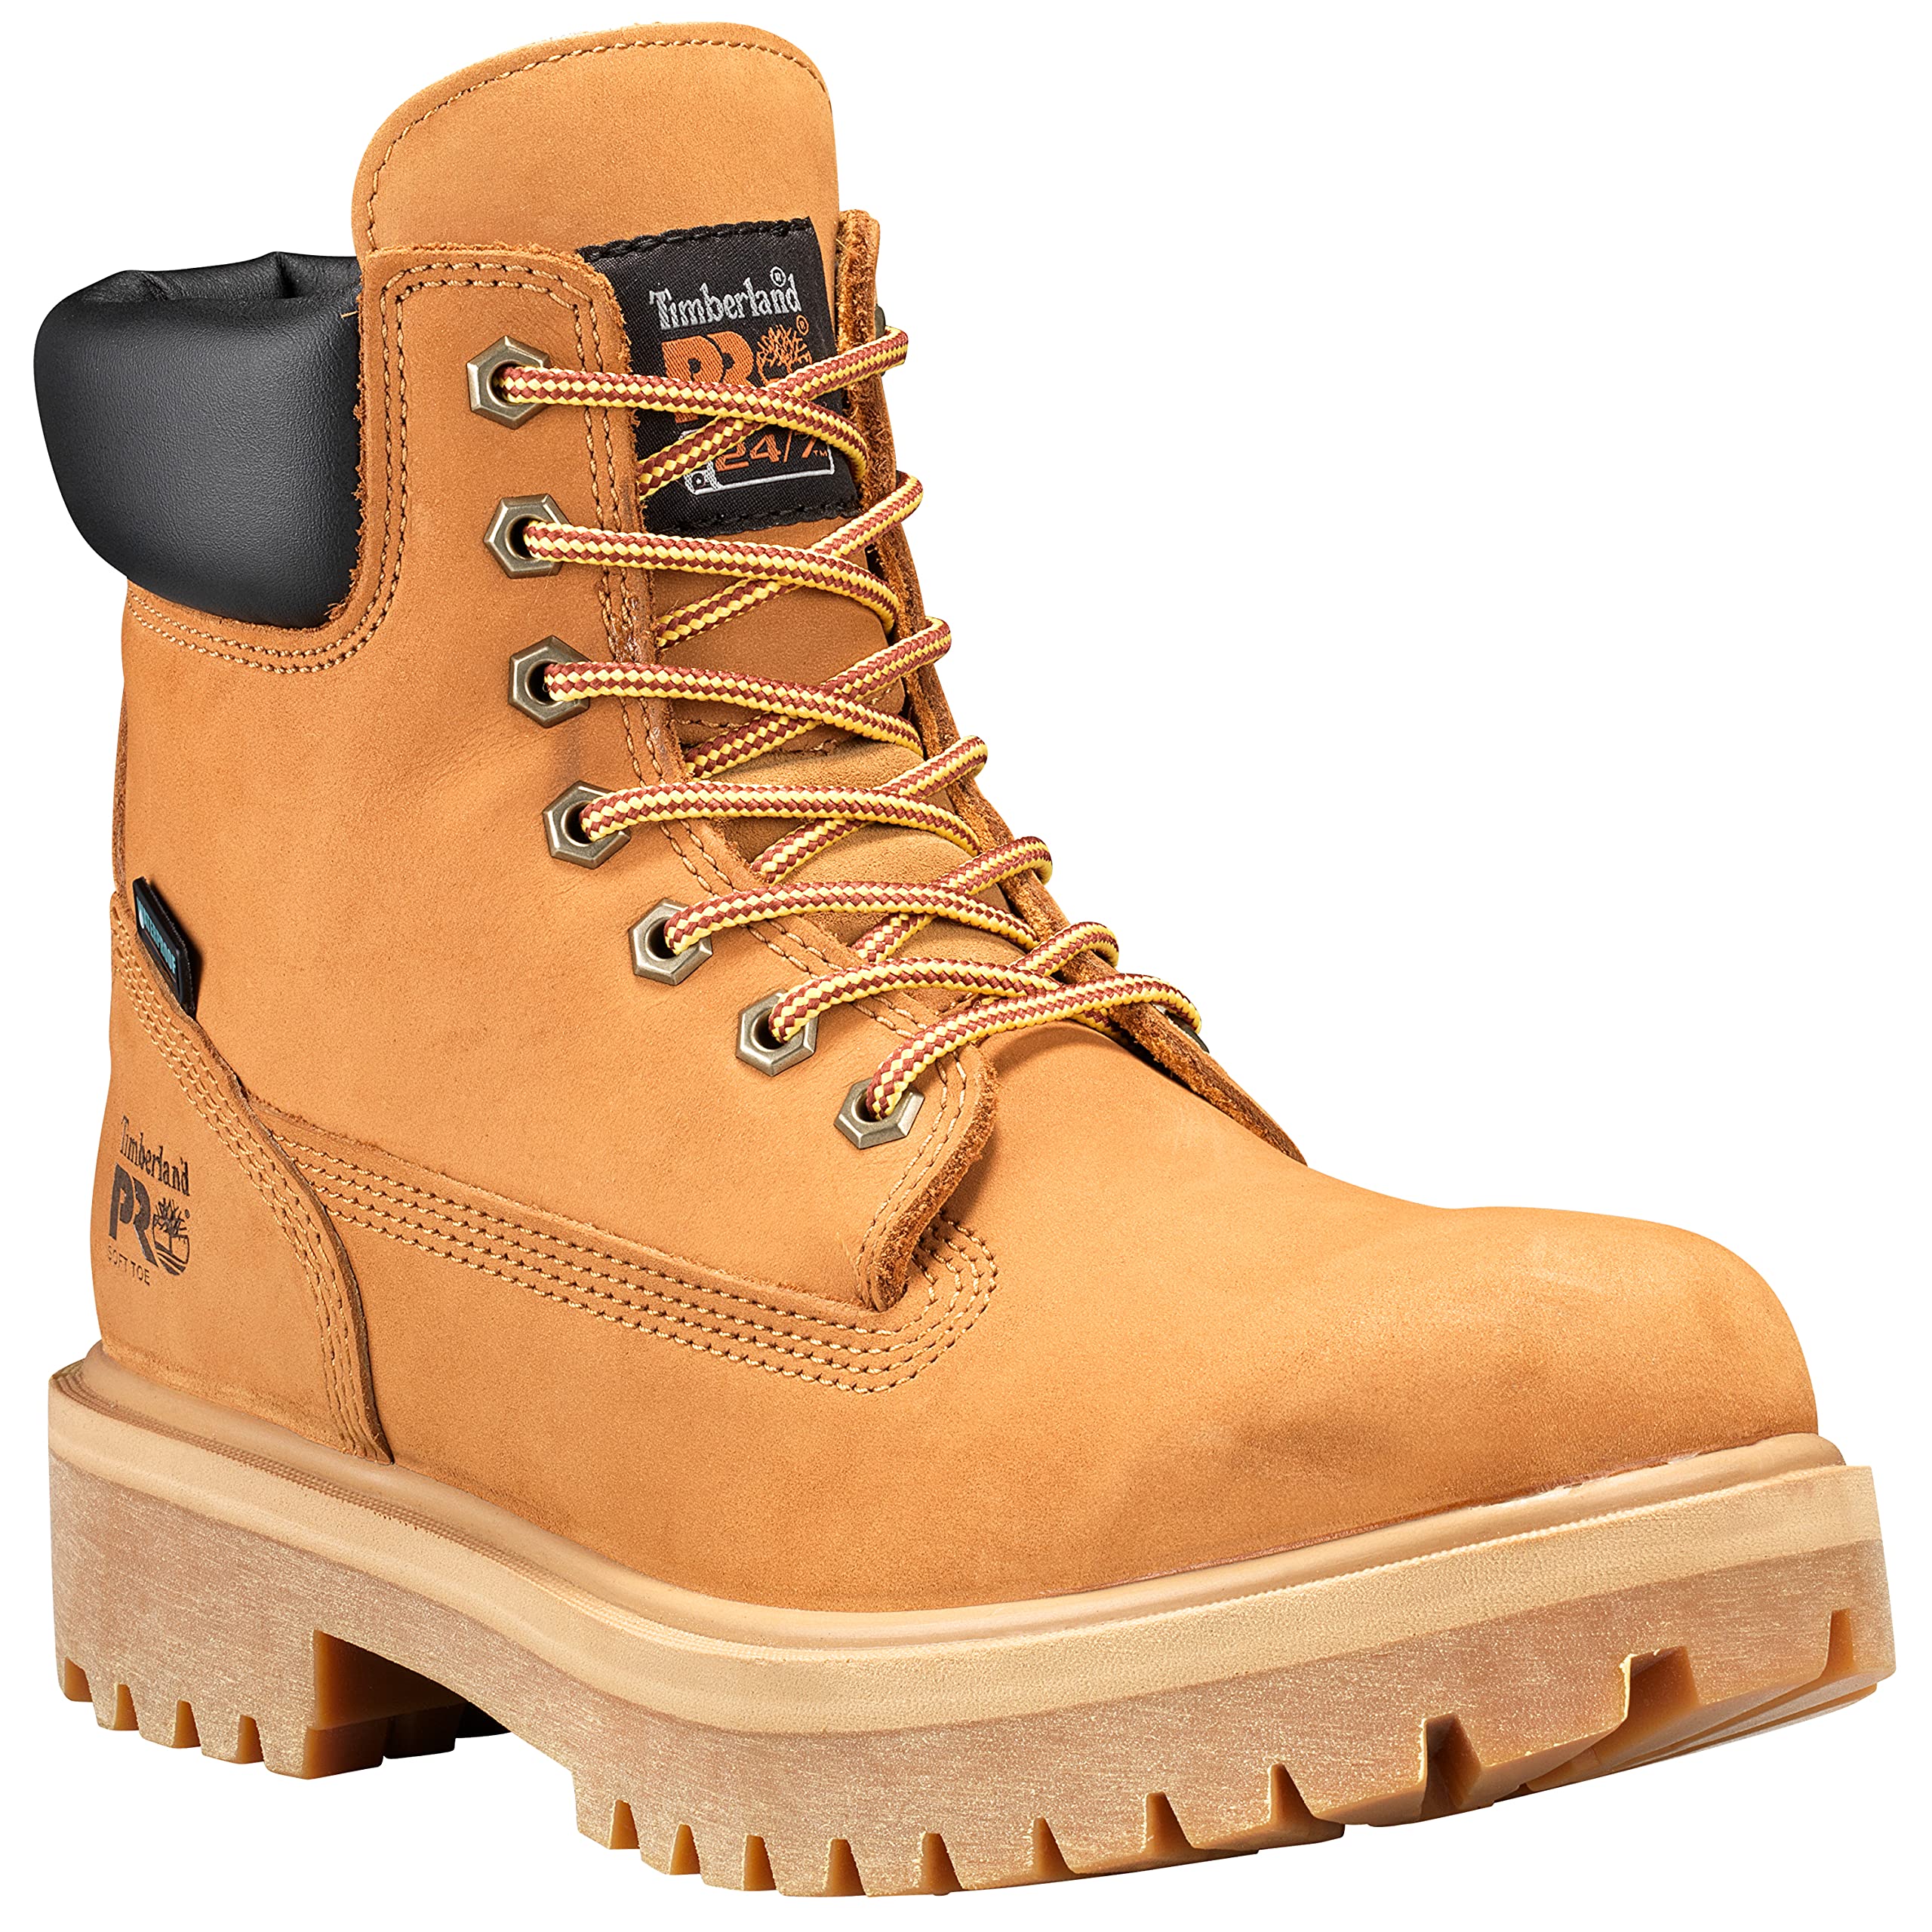 Timberland PRO Men's Direct Attach 6 Inch Soft Toe Insulated Waterproof 6 WP INS 200g